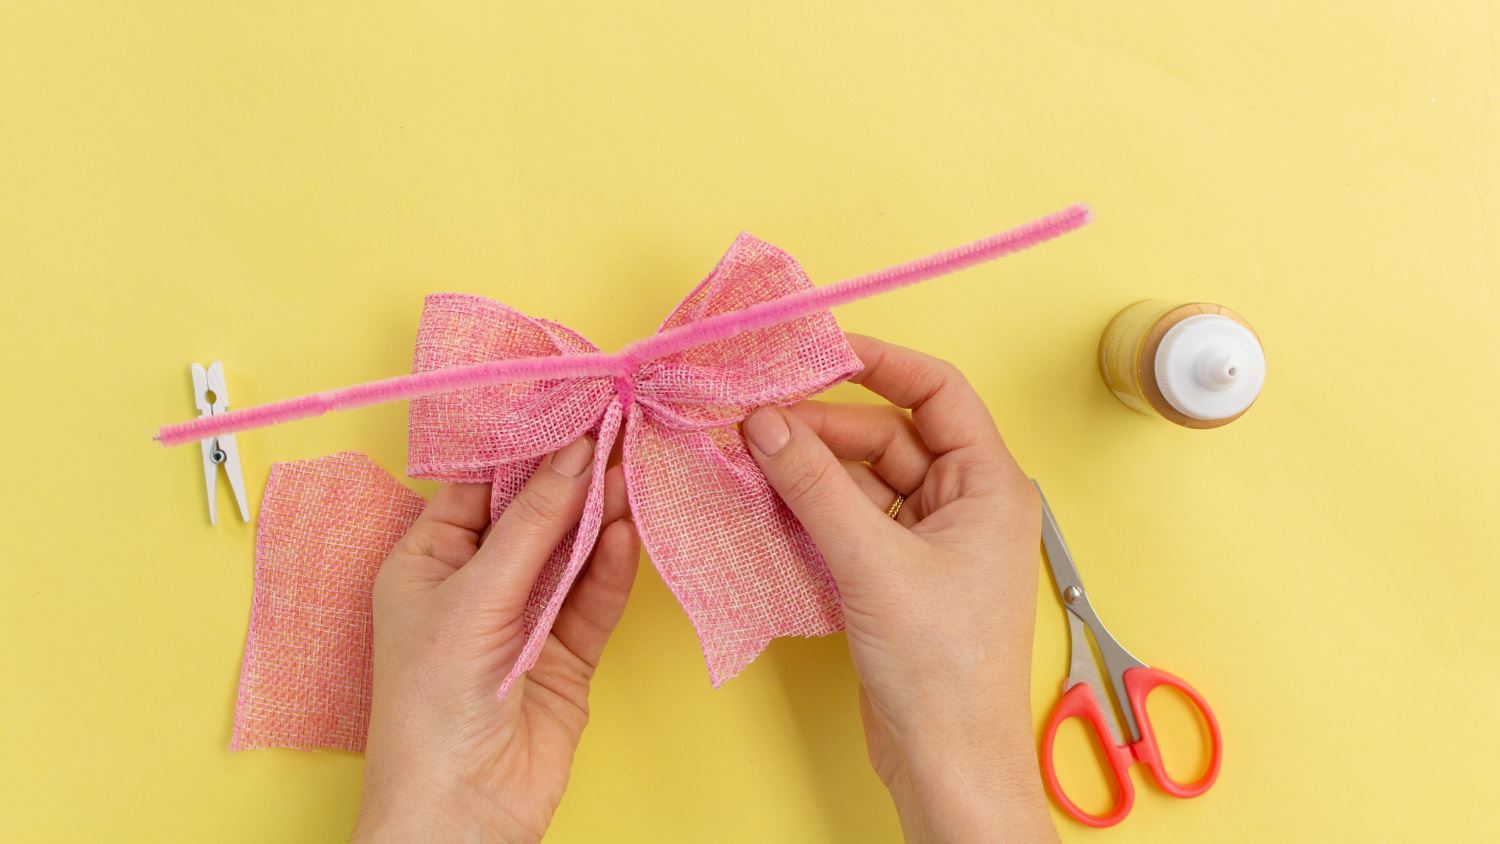 Wrap pipe cleaner around bow